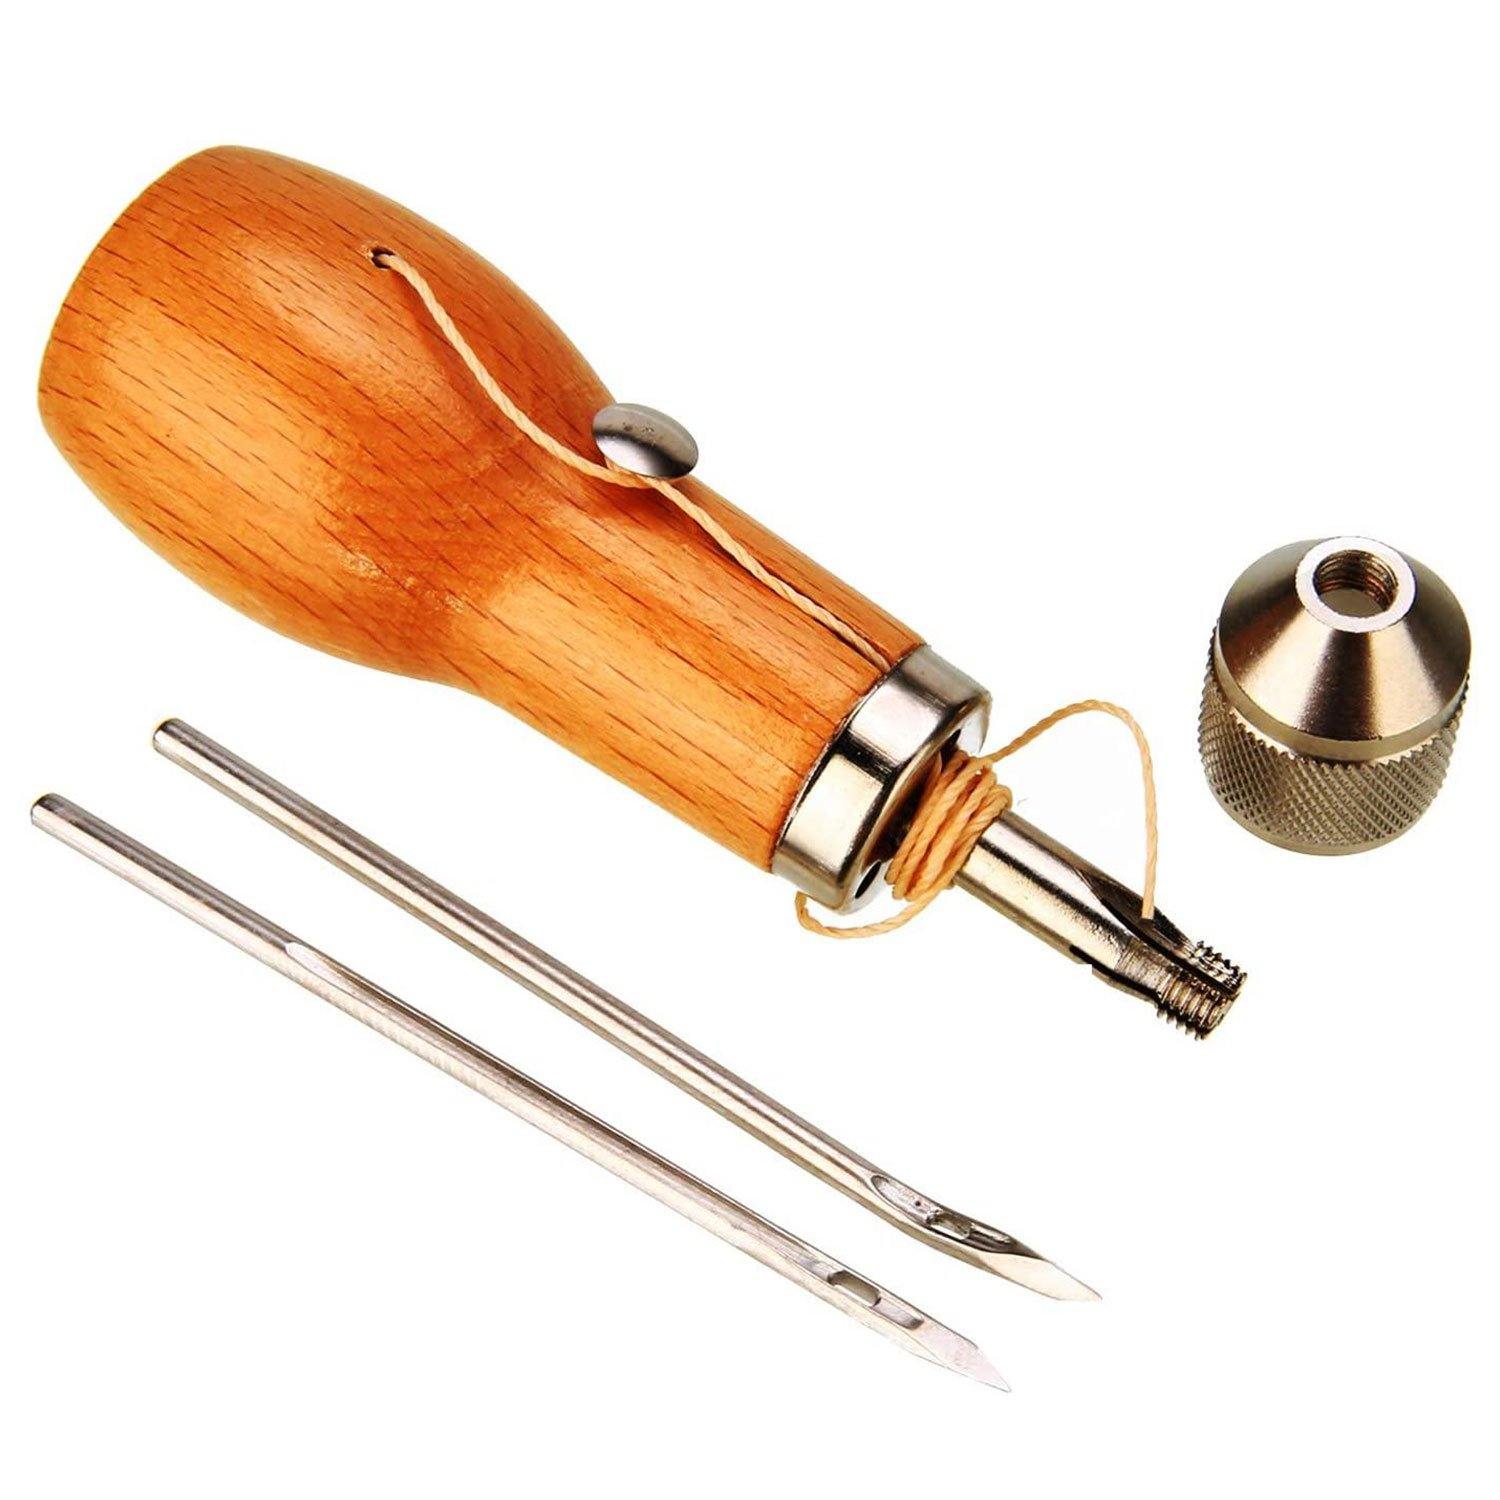 Stitcher Sewing Awl,Knoweasy Sewing Awl Tool Kit for Leather Sail